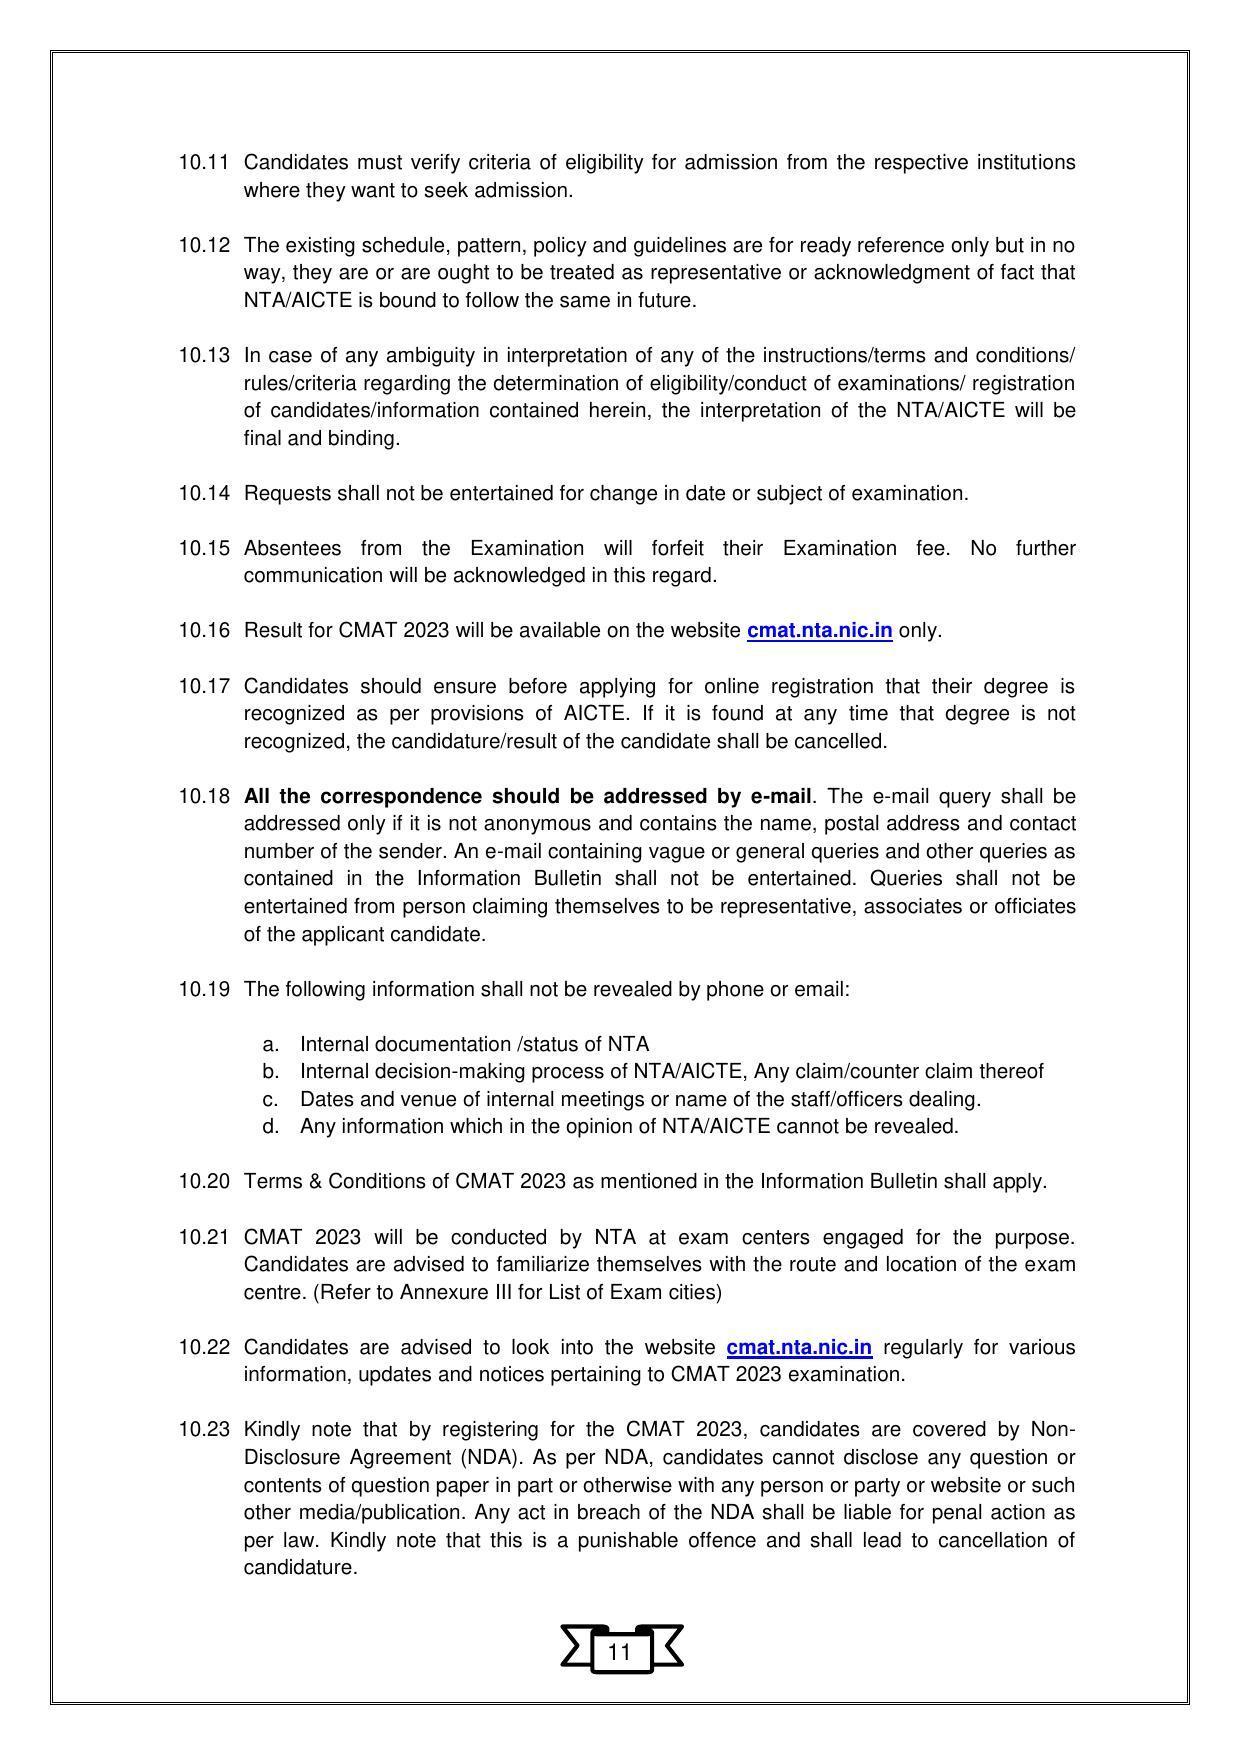 CMAT 2023 Information Bulletin - Page 14